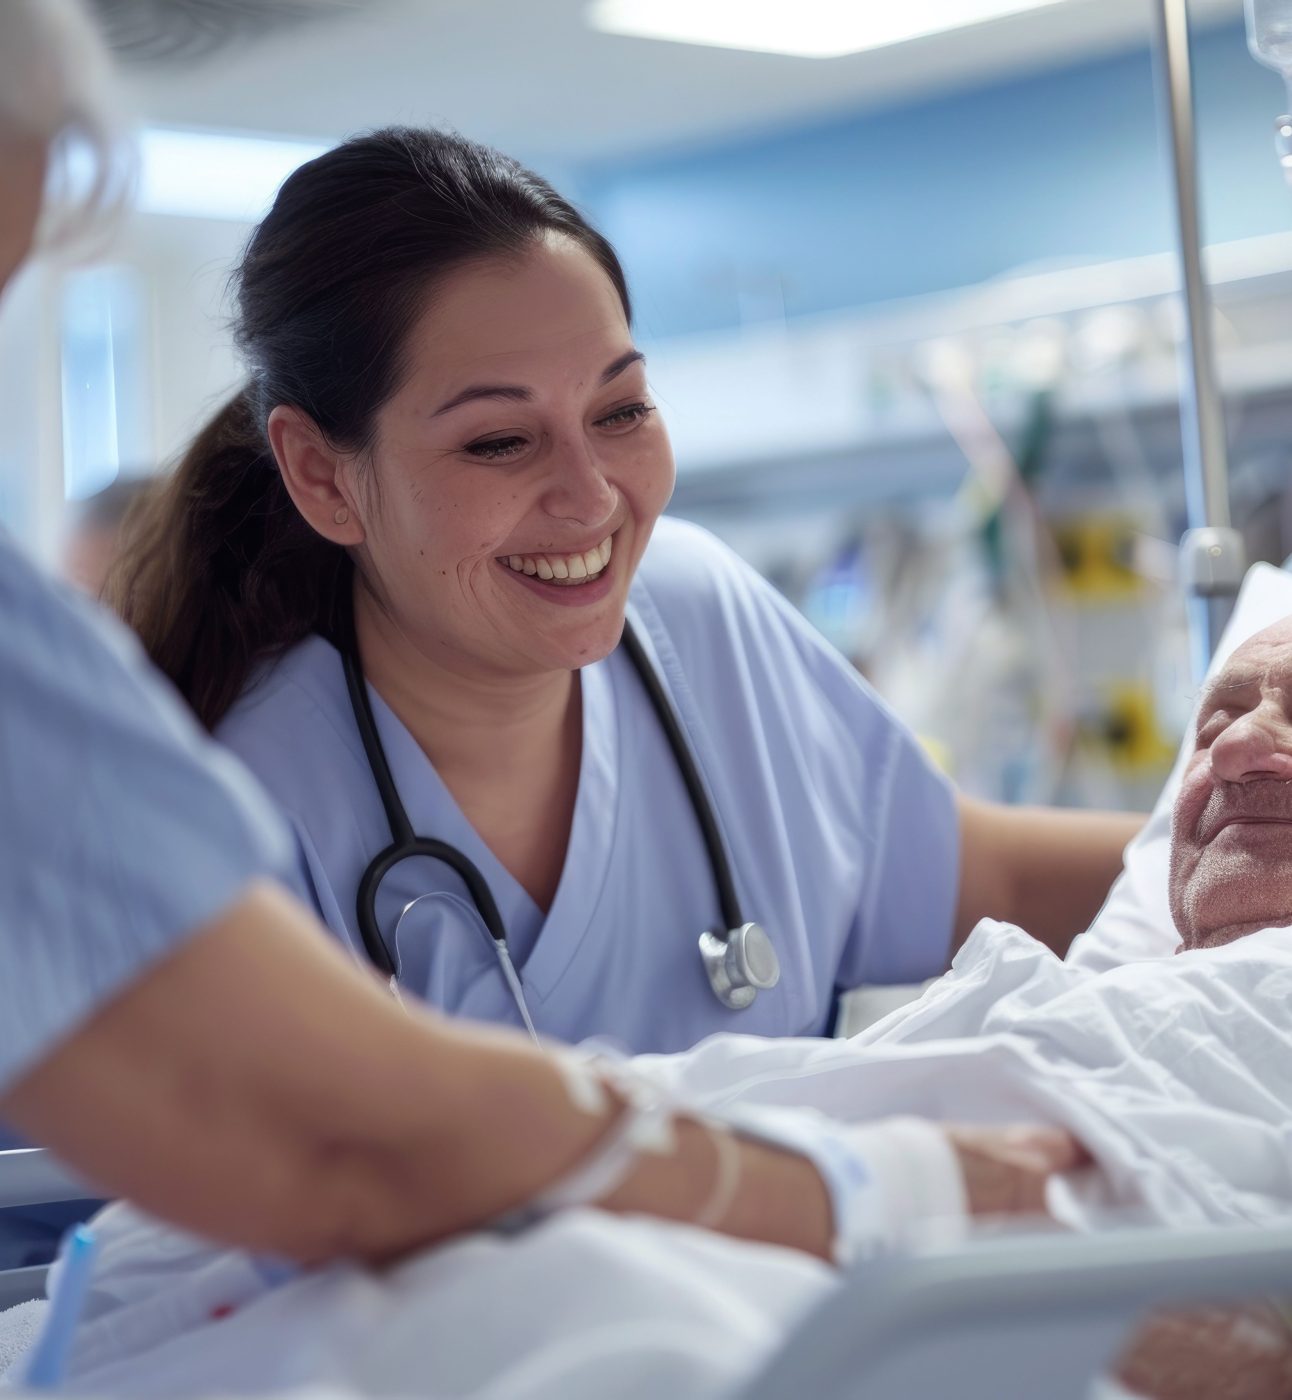 Smiling nurse checking senior patient who is recovering at hospital